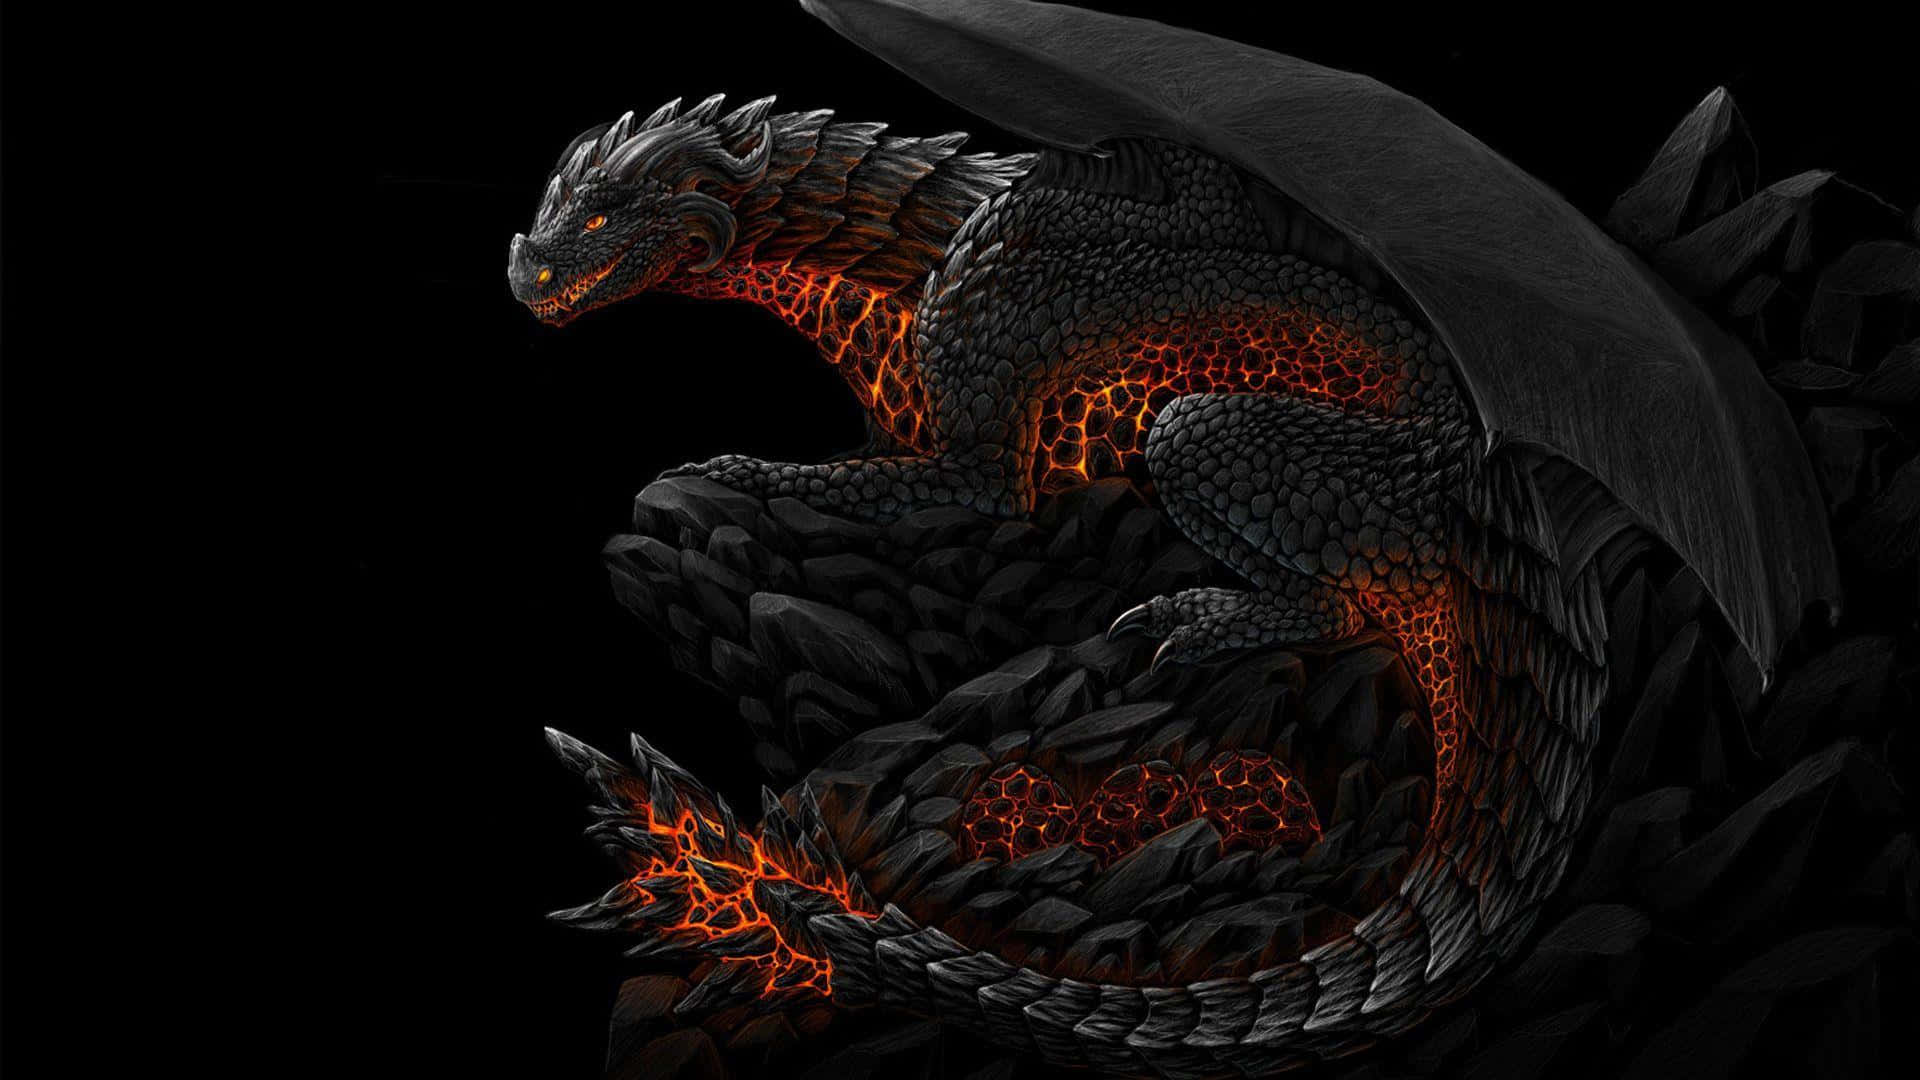 Wallpaper Brown and Black Dragon on Fire, Background - Download Free Image